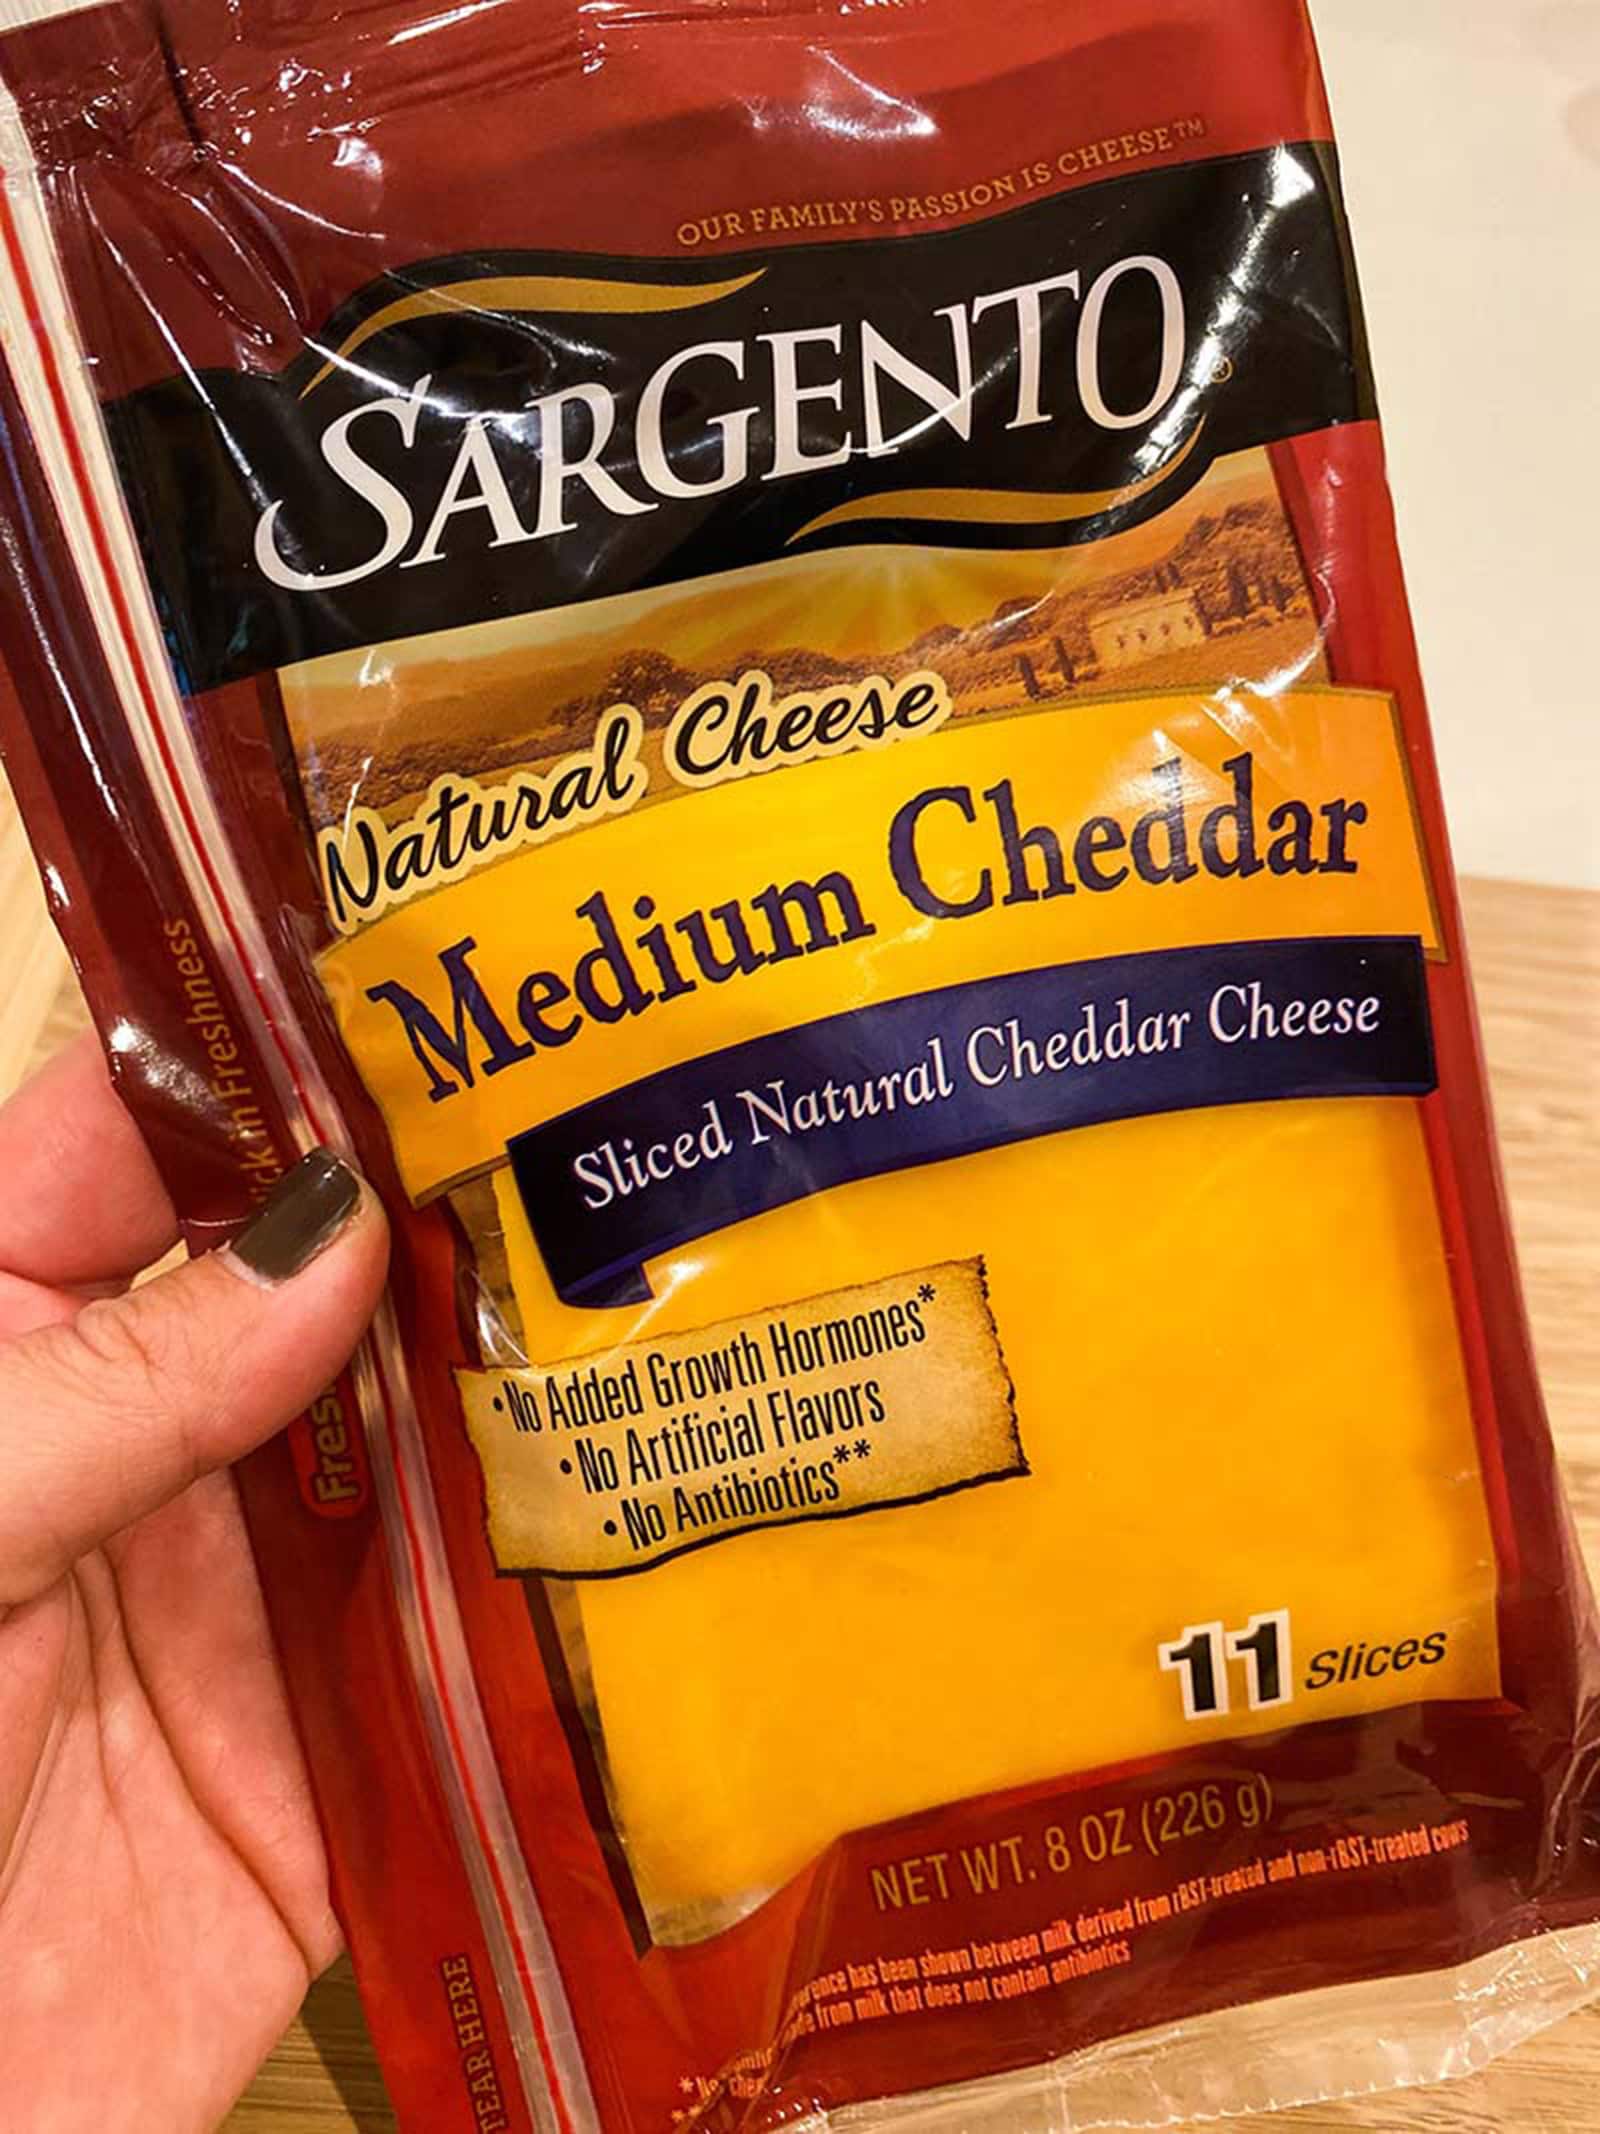 i like sargento cheddar cheese